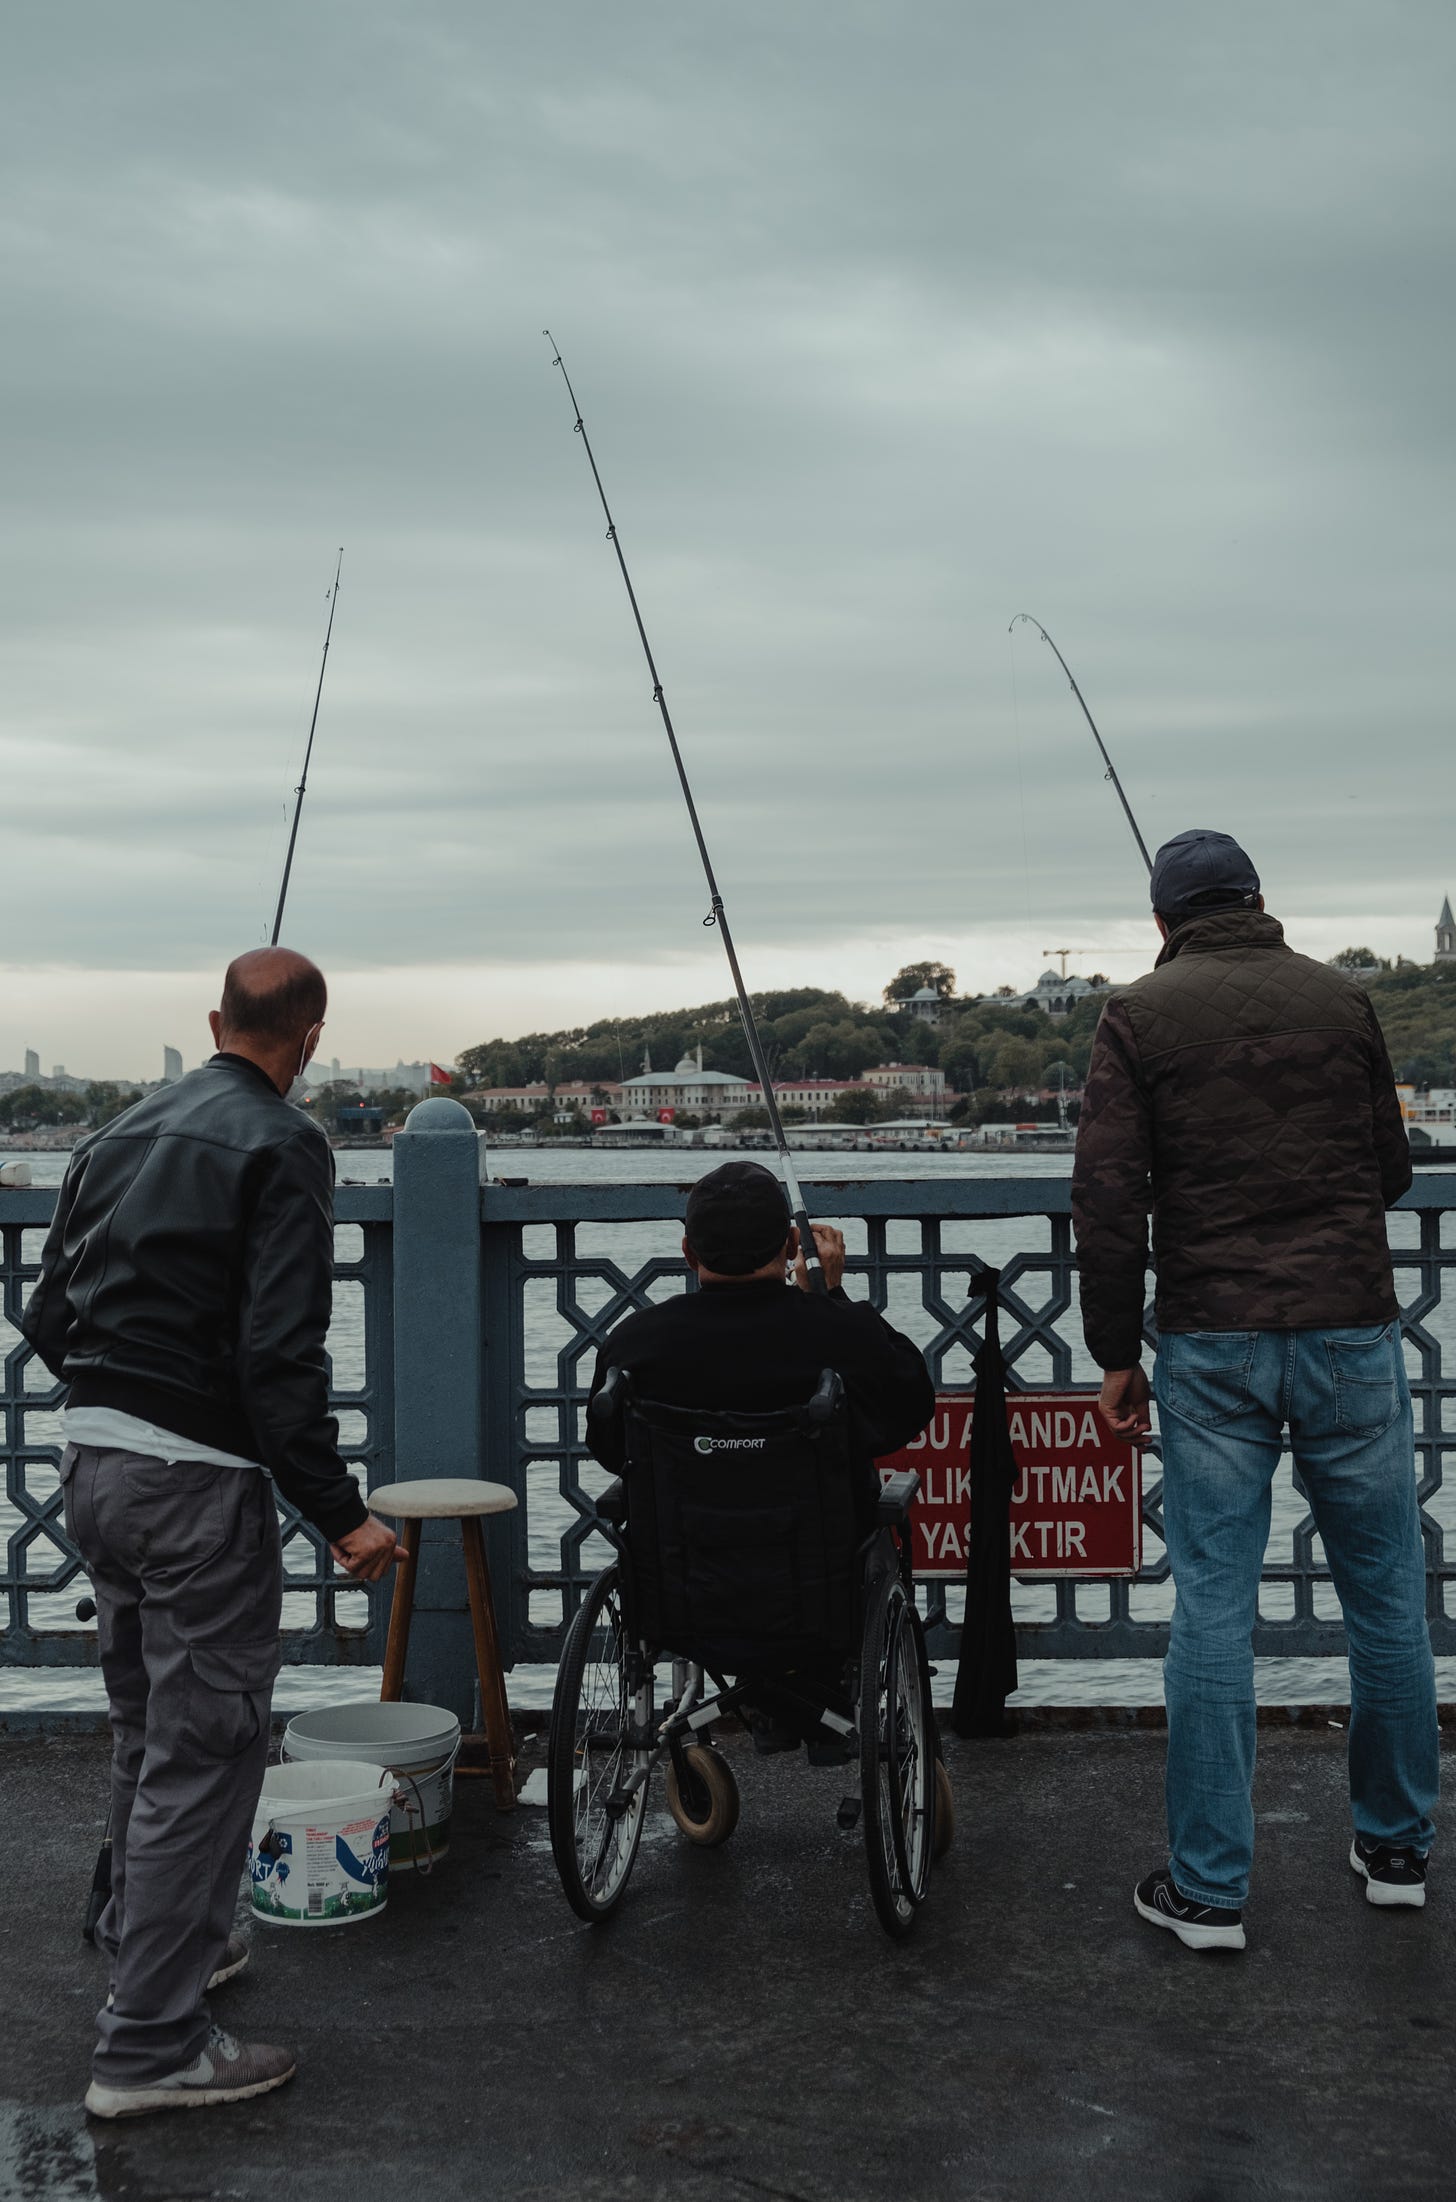 Three men fishing, the middle one is seated in a wheelchair. All of the men have their backs to the camera .